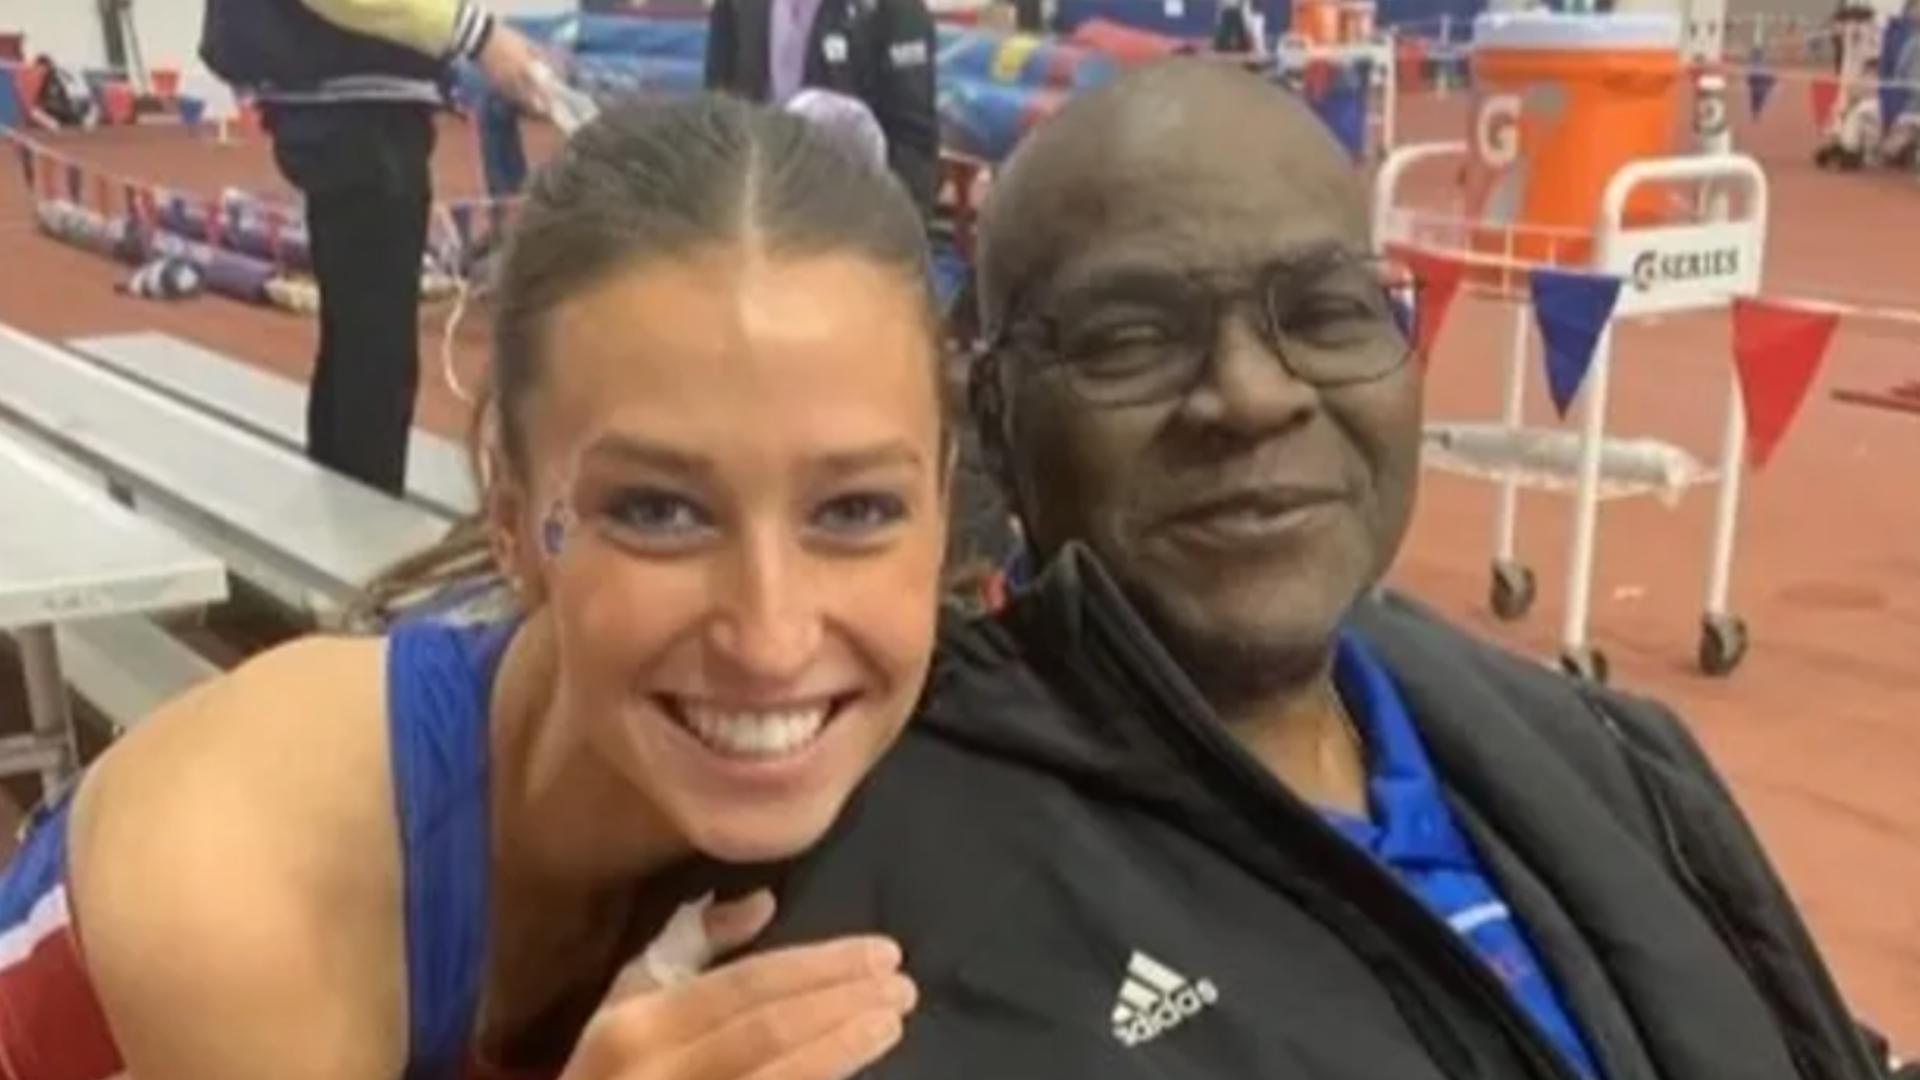 Coach Vincent Bingham discovered Mason Meinershagen while she was in eighth grade. Now, medical and financial woes may keep him from joining her on the world's stage